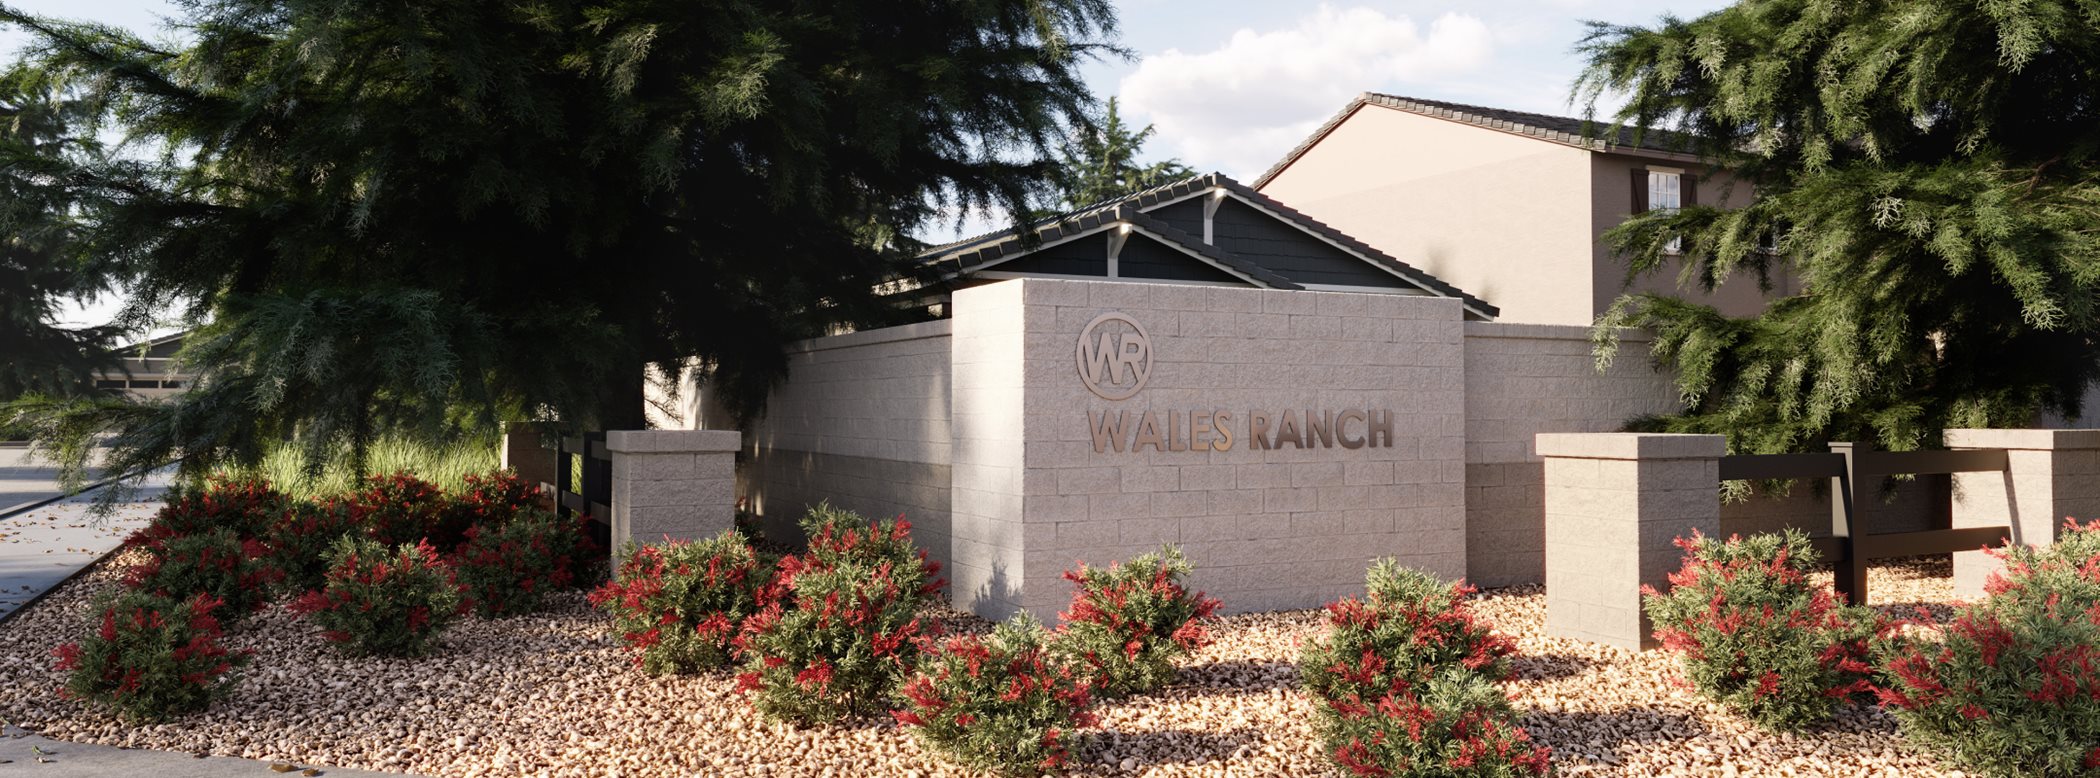 Wales ranch entry monument